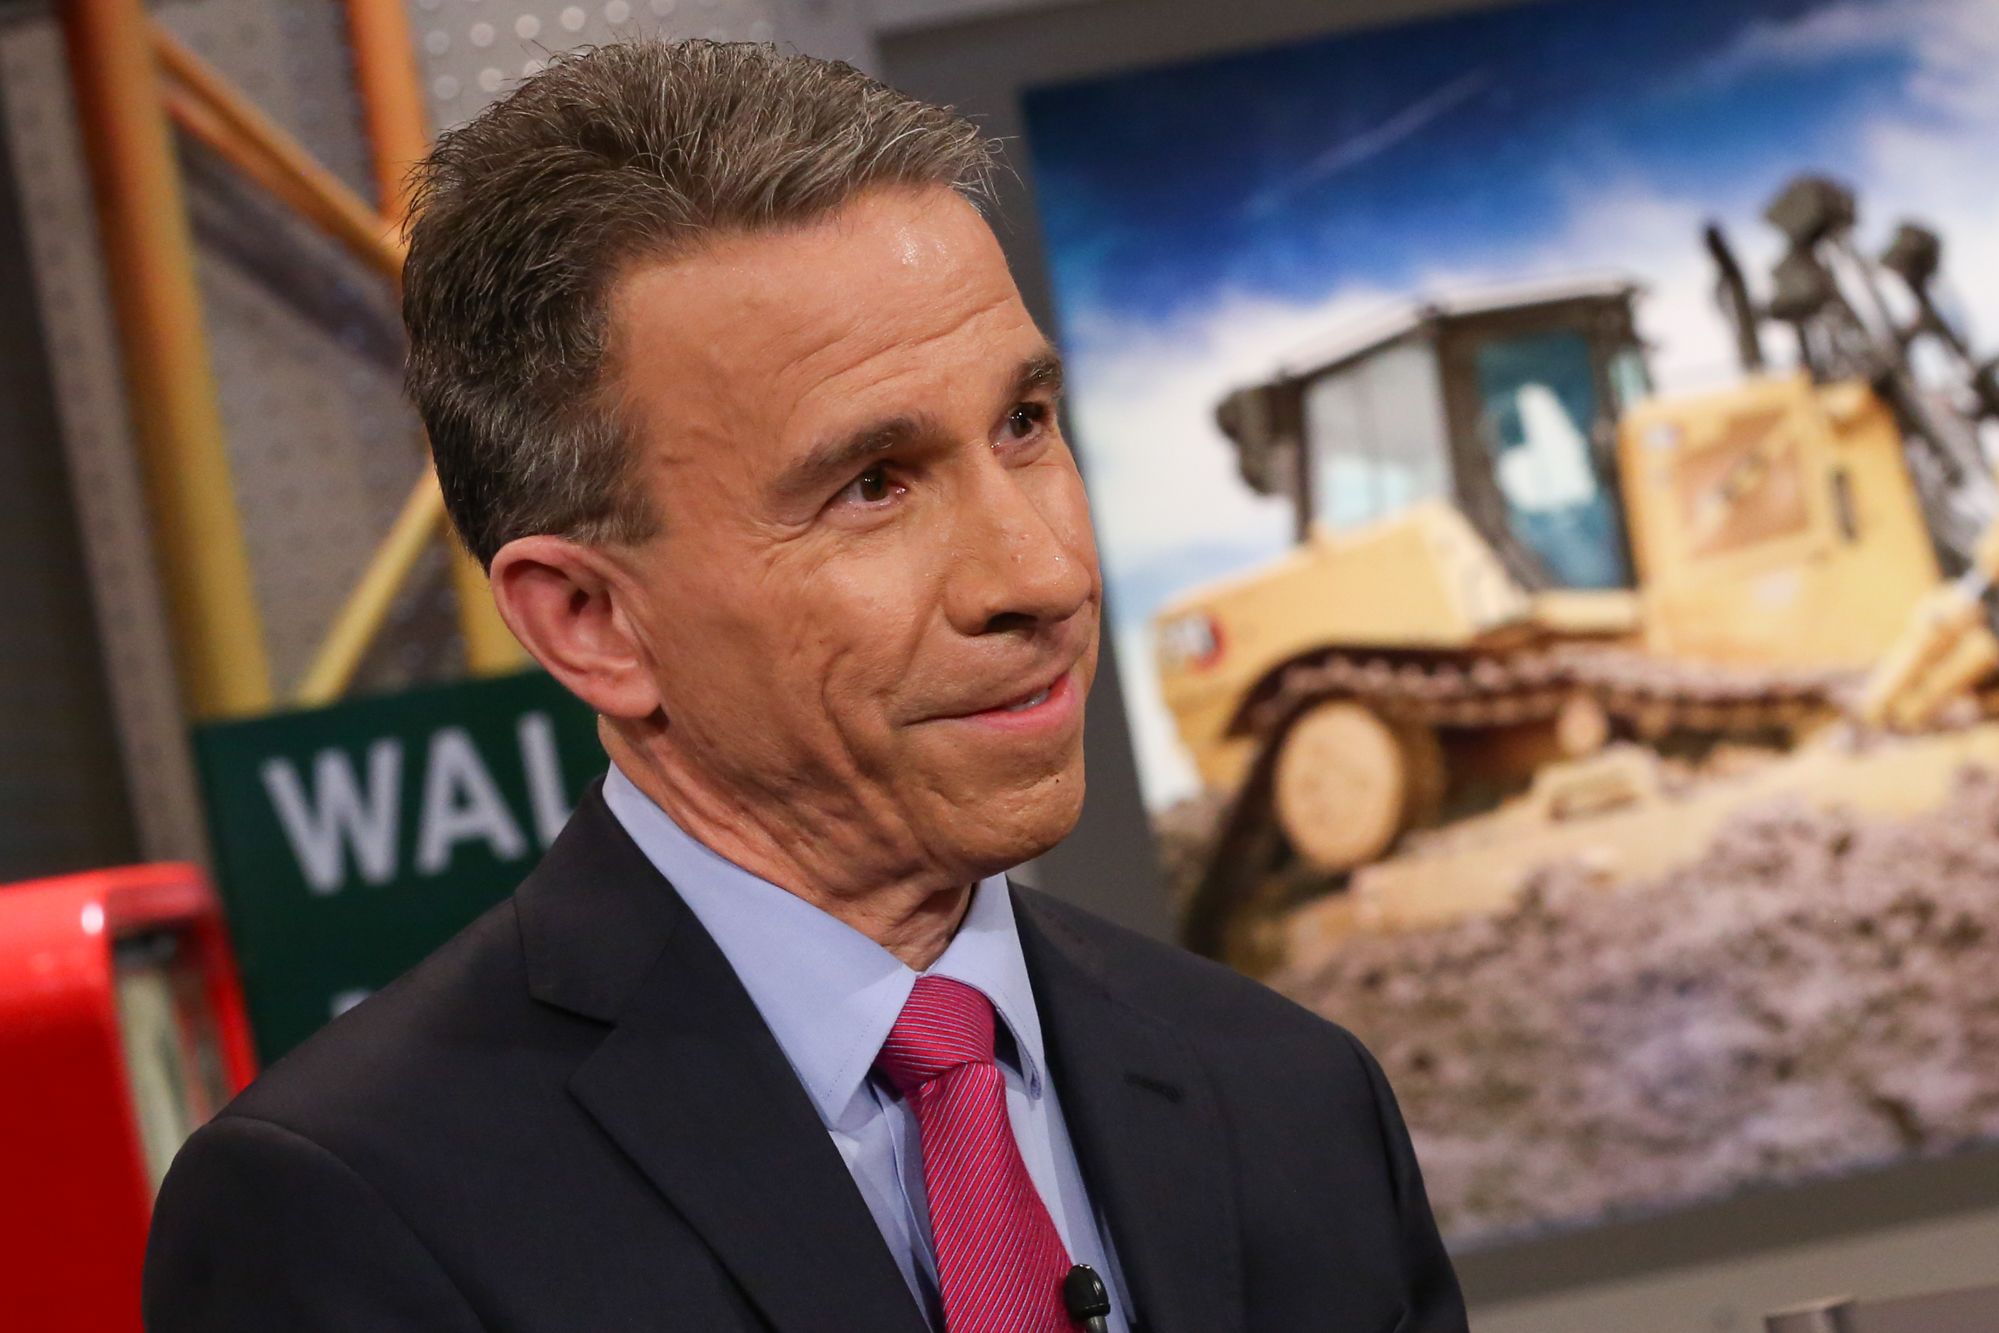 Caterpillar CEO on China trade war fears: We're 'meeting our forecast'